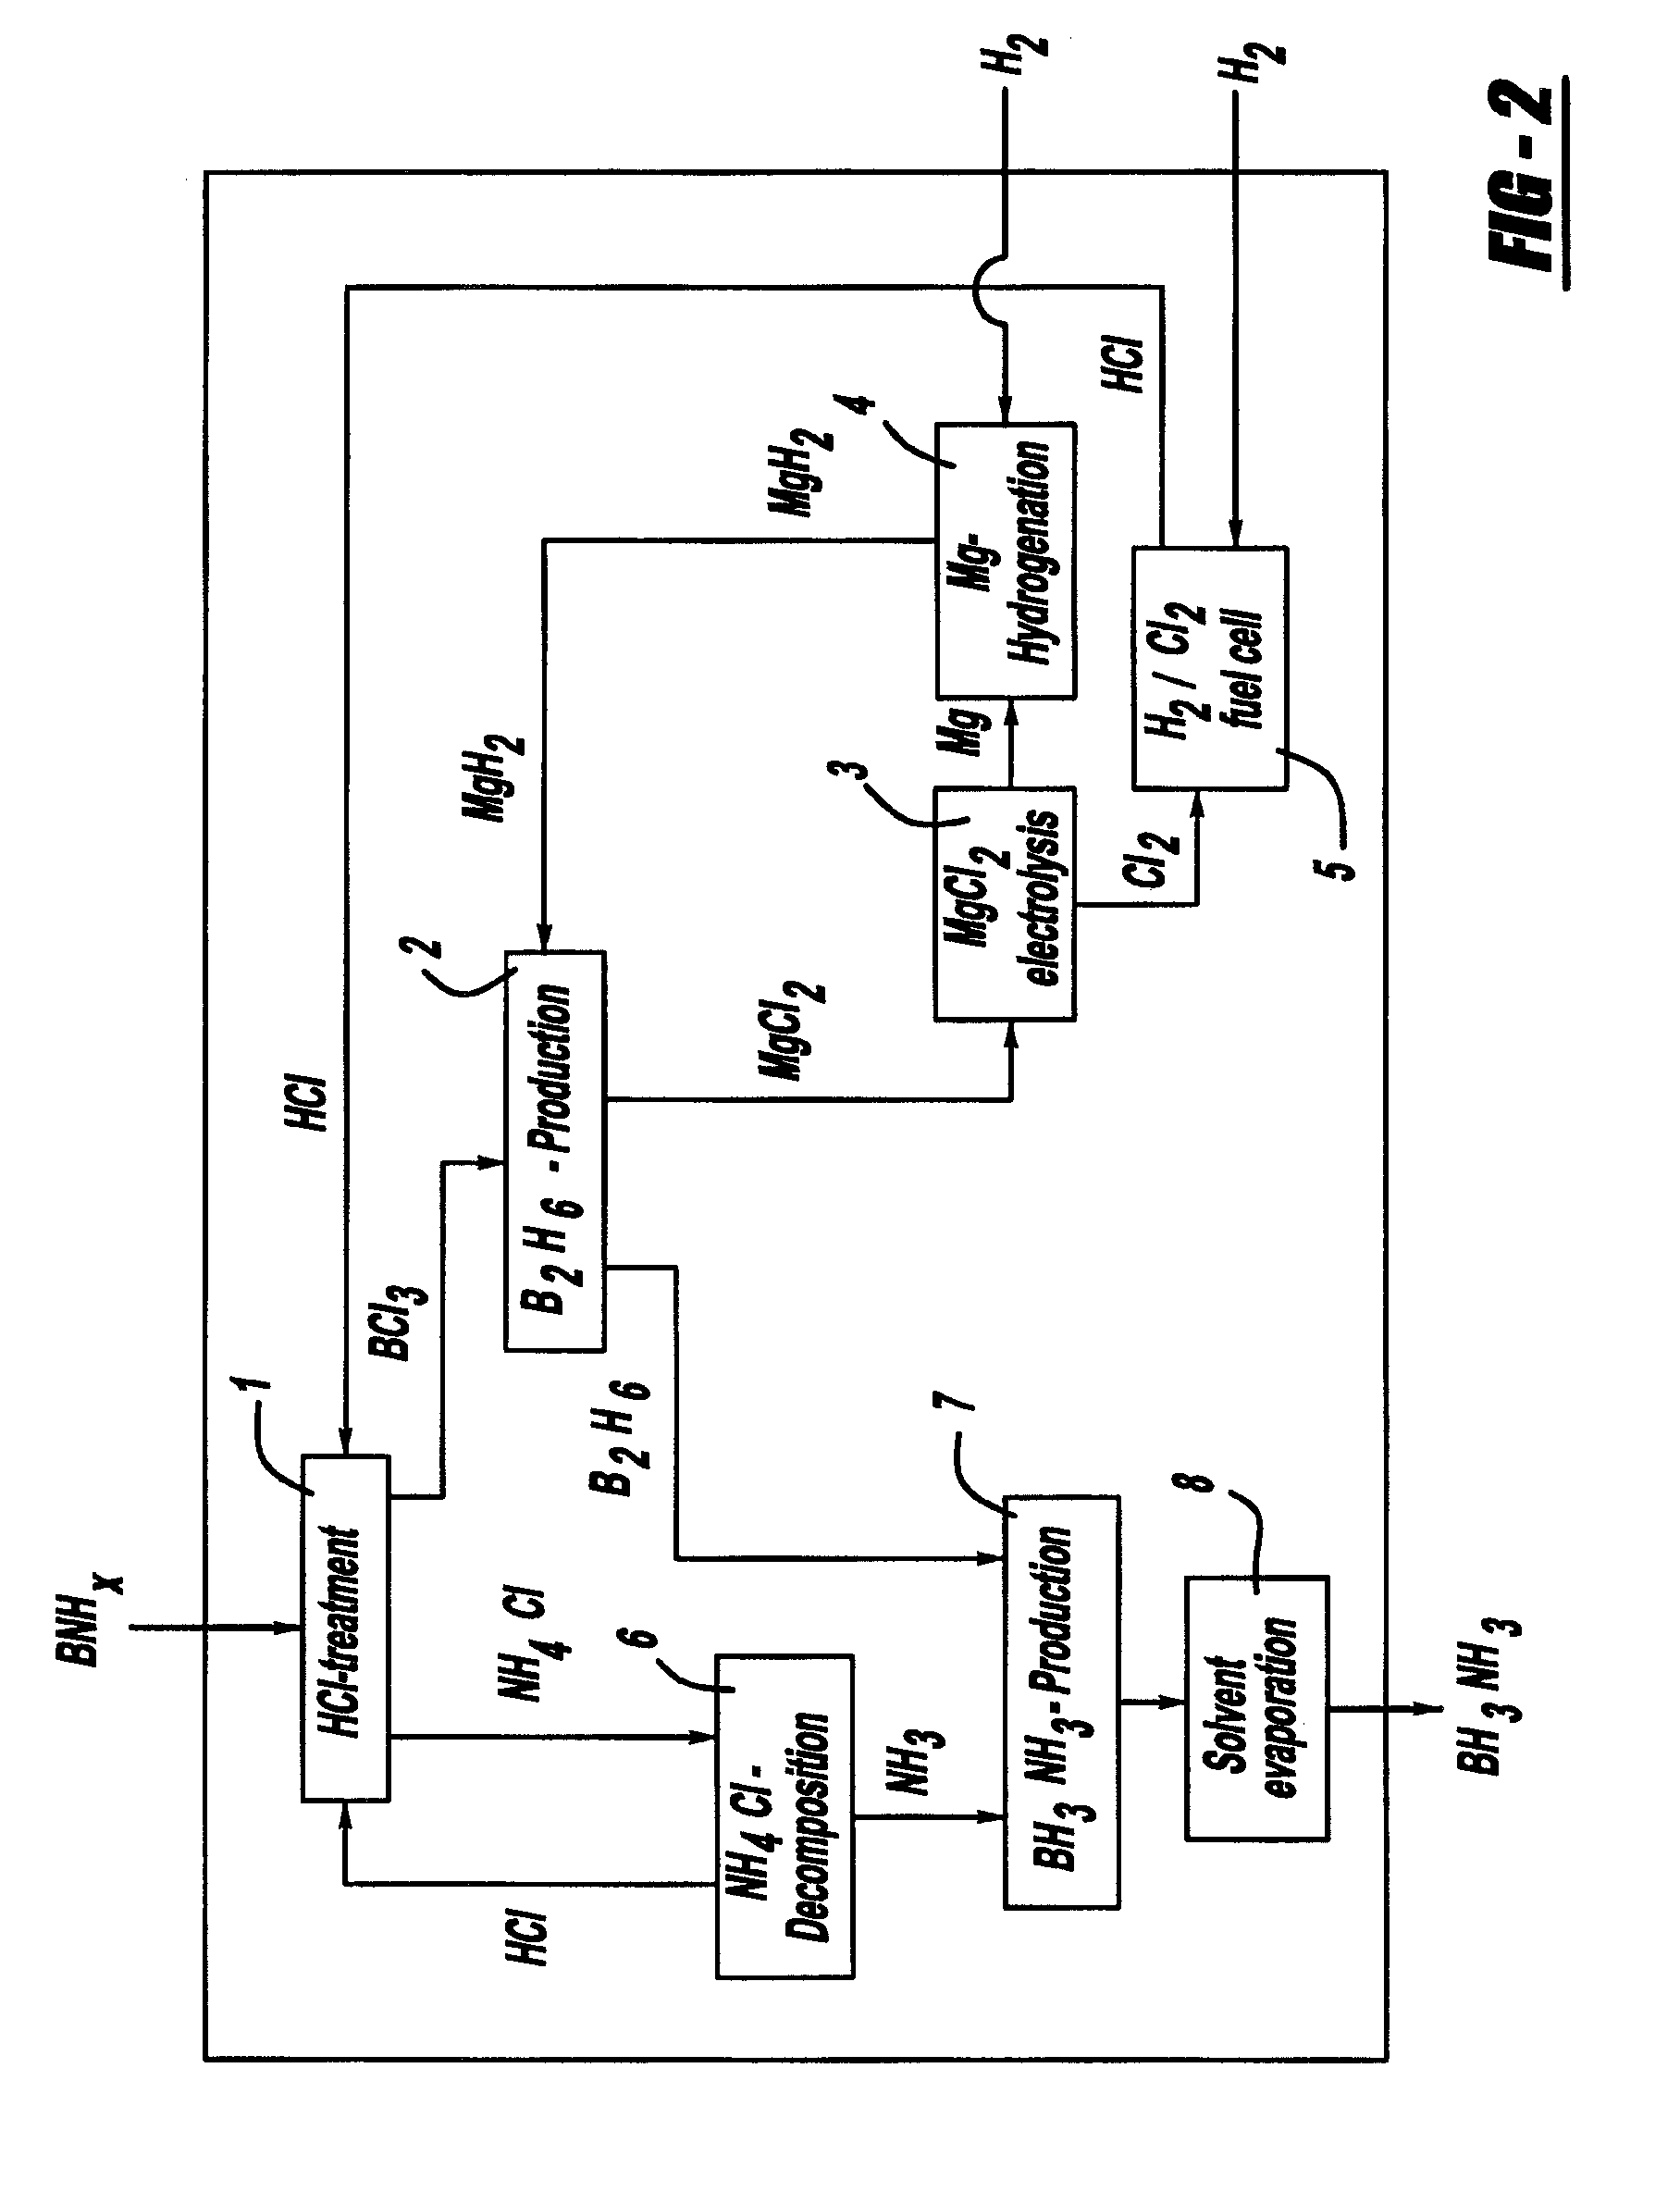 Procedure for the hydrogenation of BNH-containing compounds